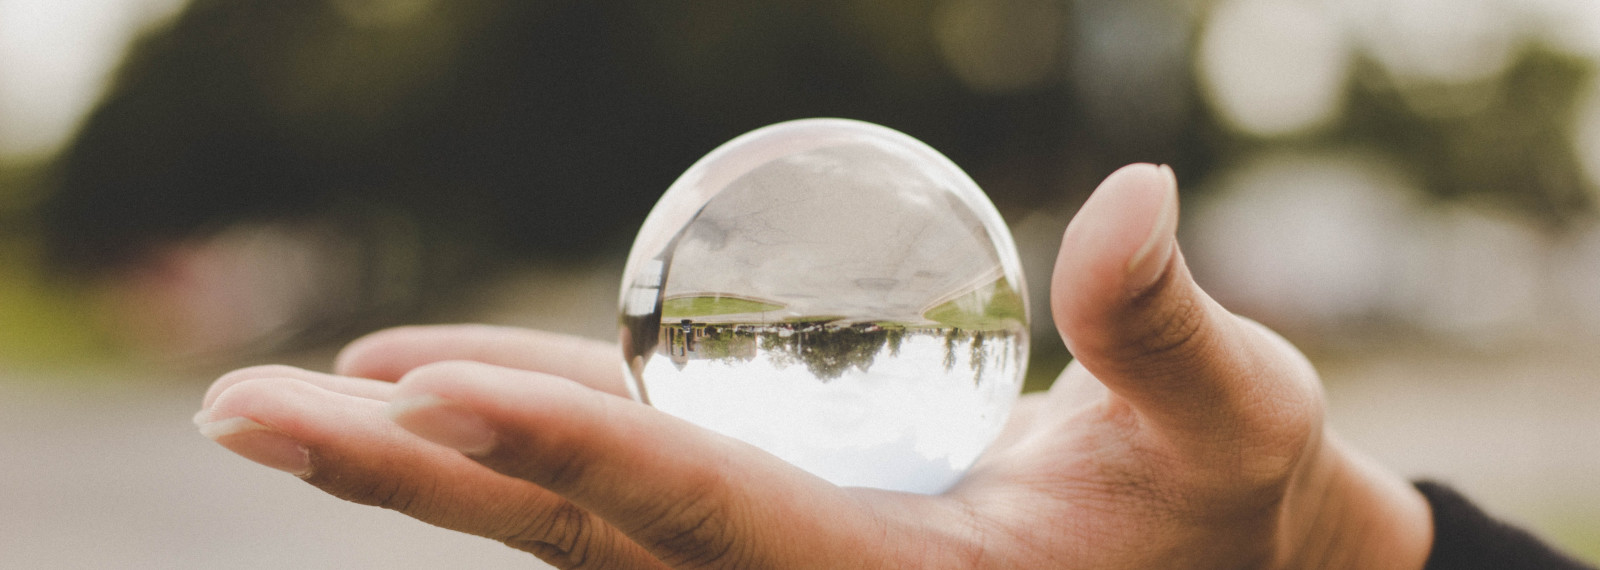 Hand holding a transparent spherical orb